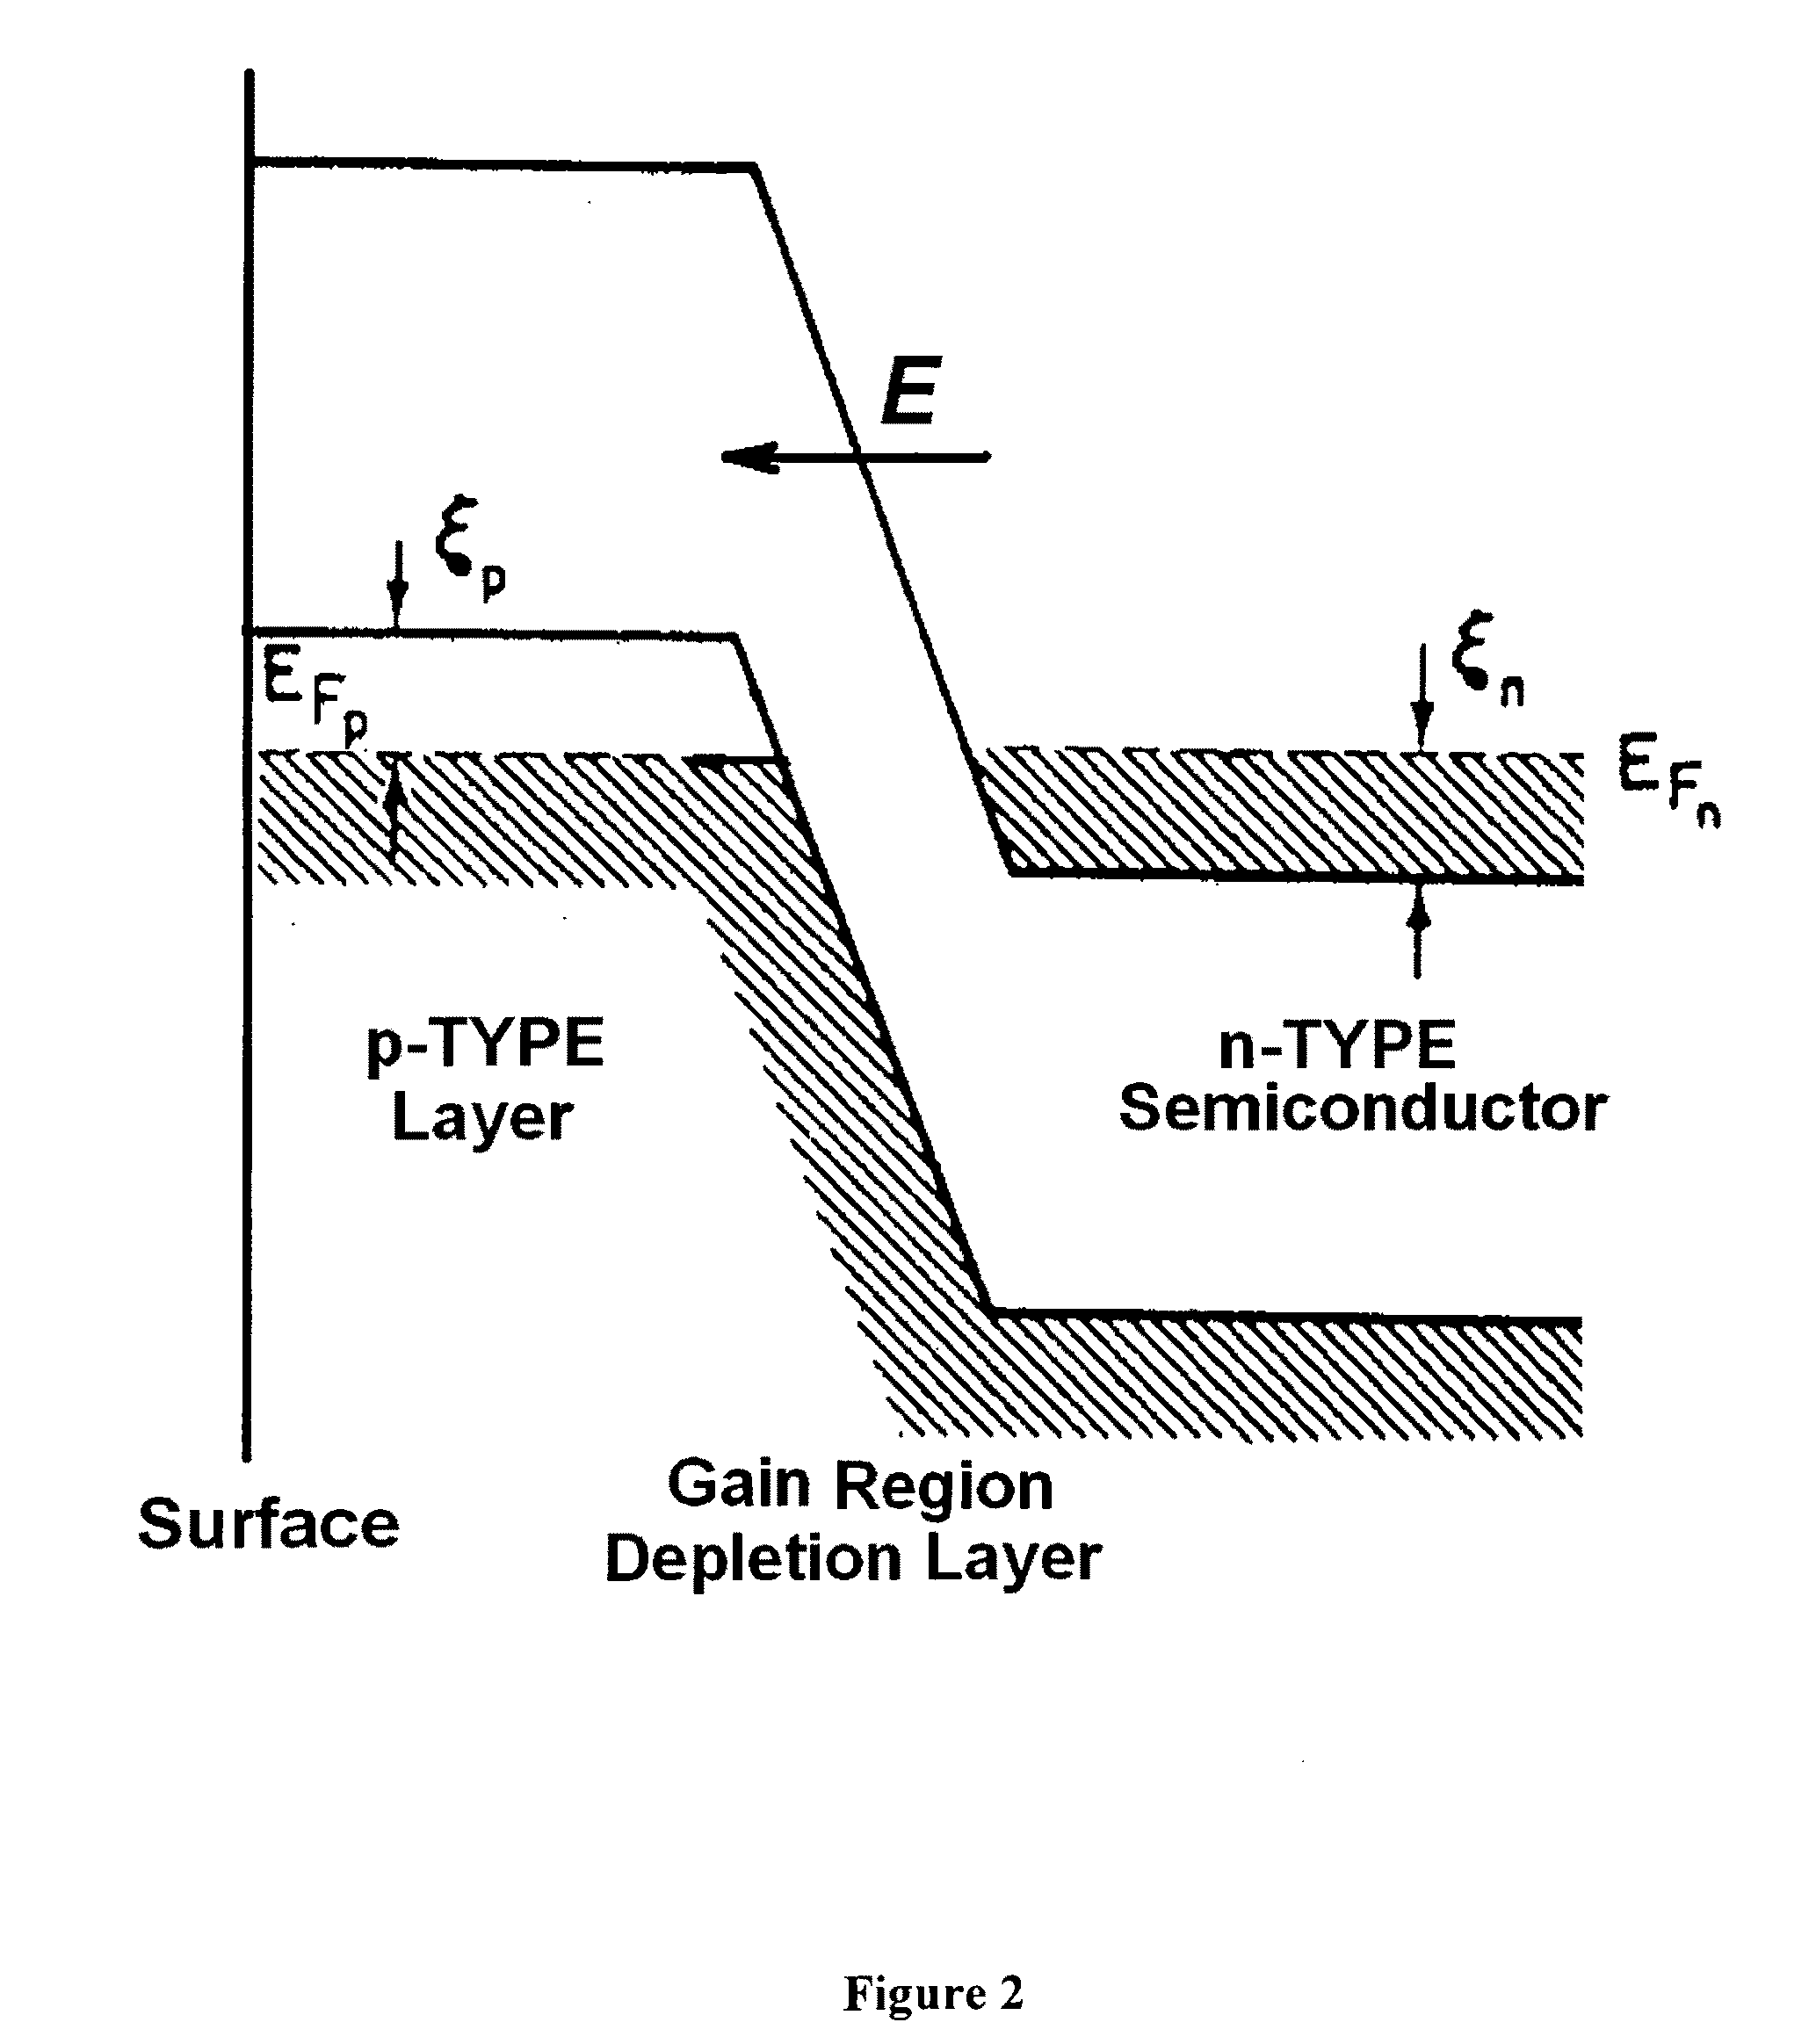 Method for fabrication of aligned nanowire structures in semiconductor materials for electronic, optoelectronic, photonic and plasmonic devices